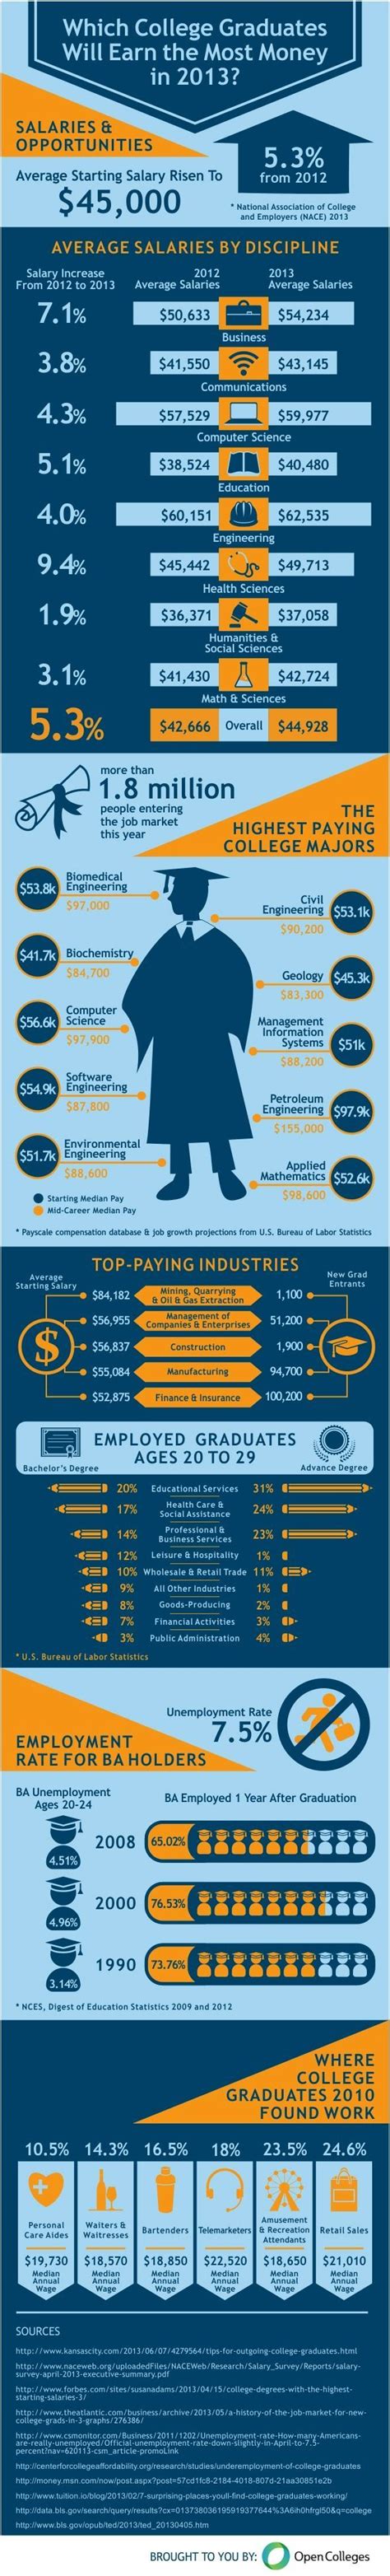 Want To Make Money Consider These College Majors Infographic